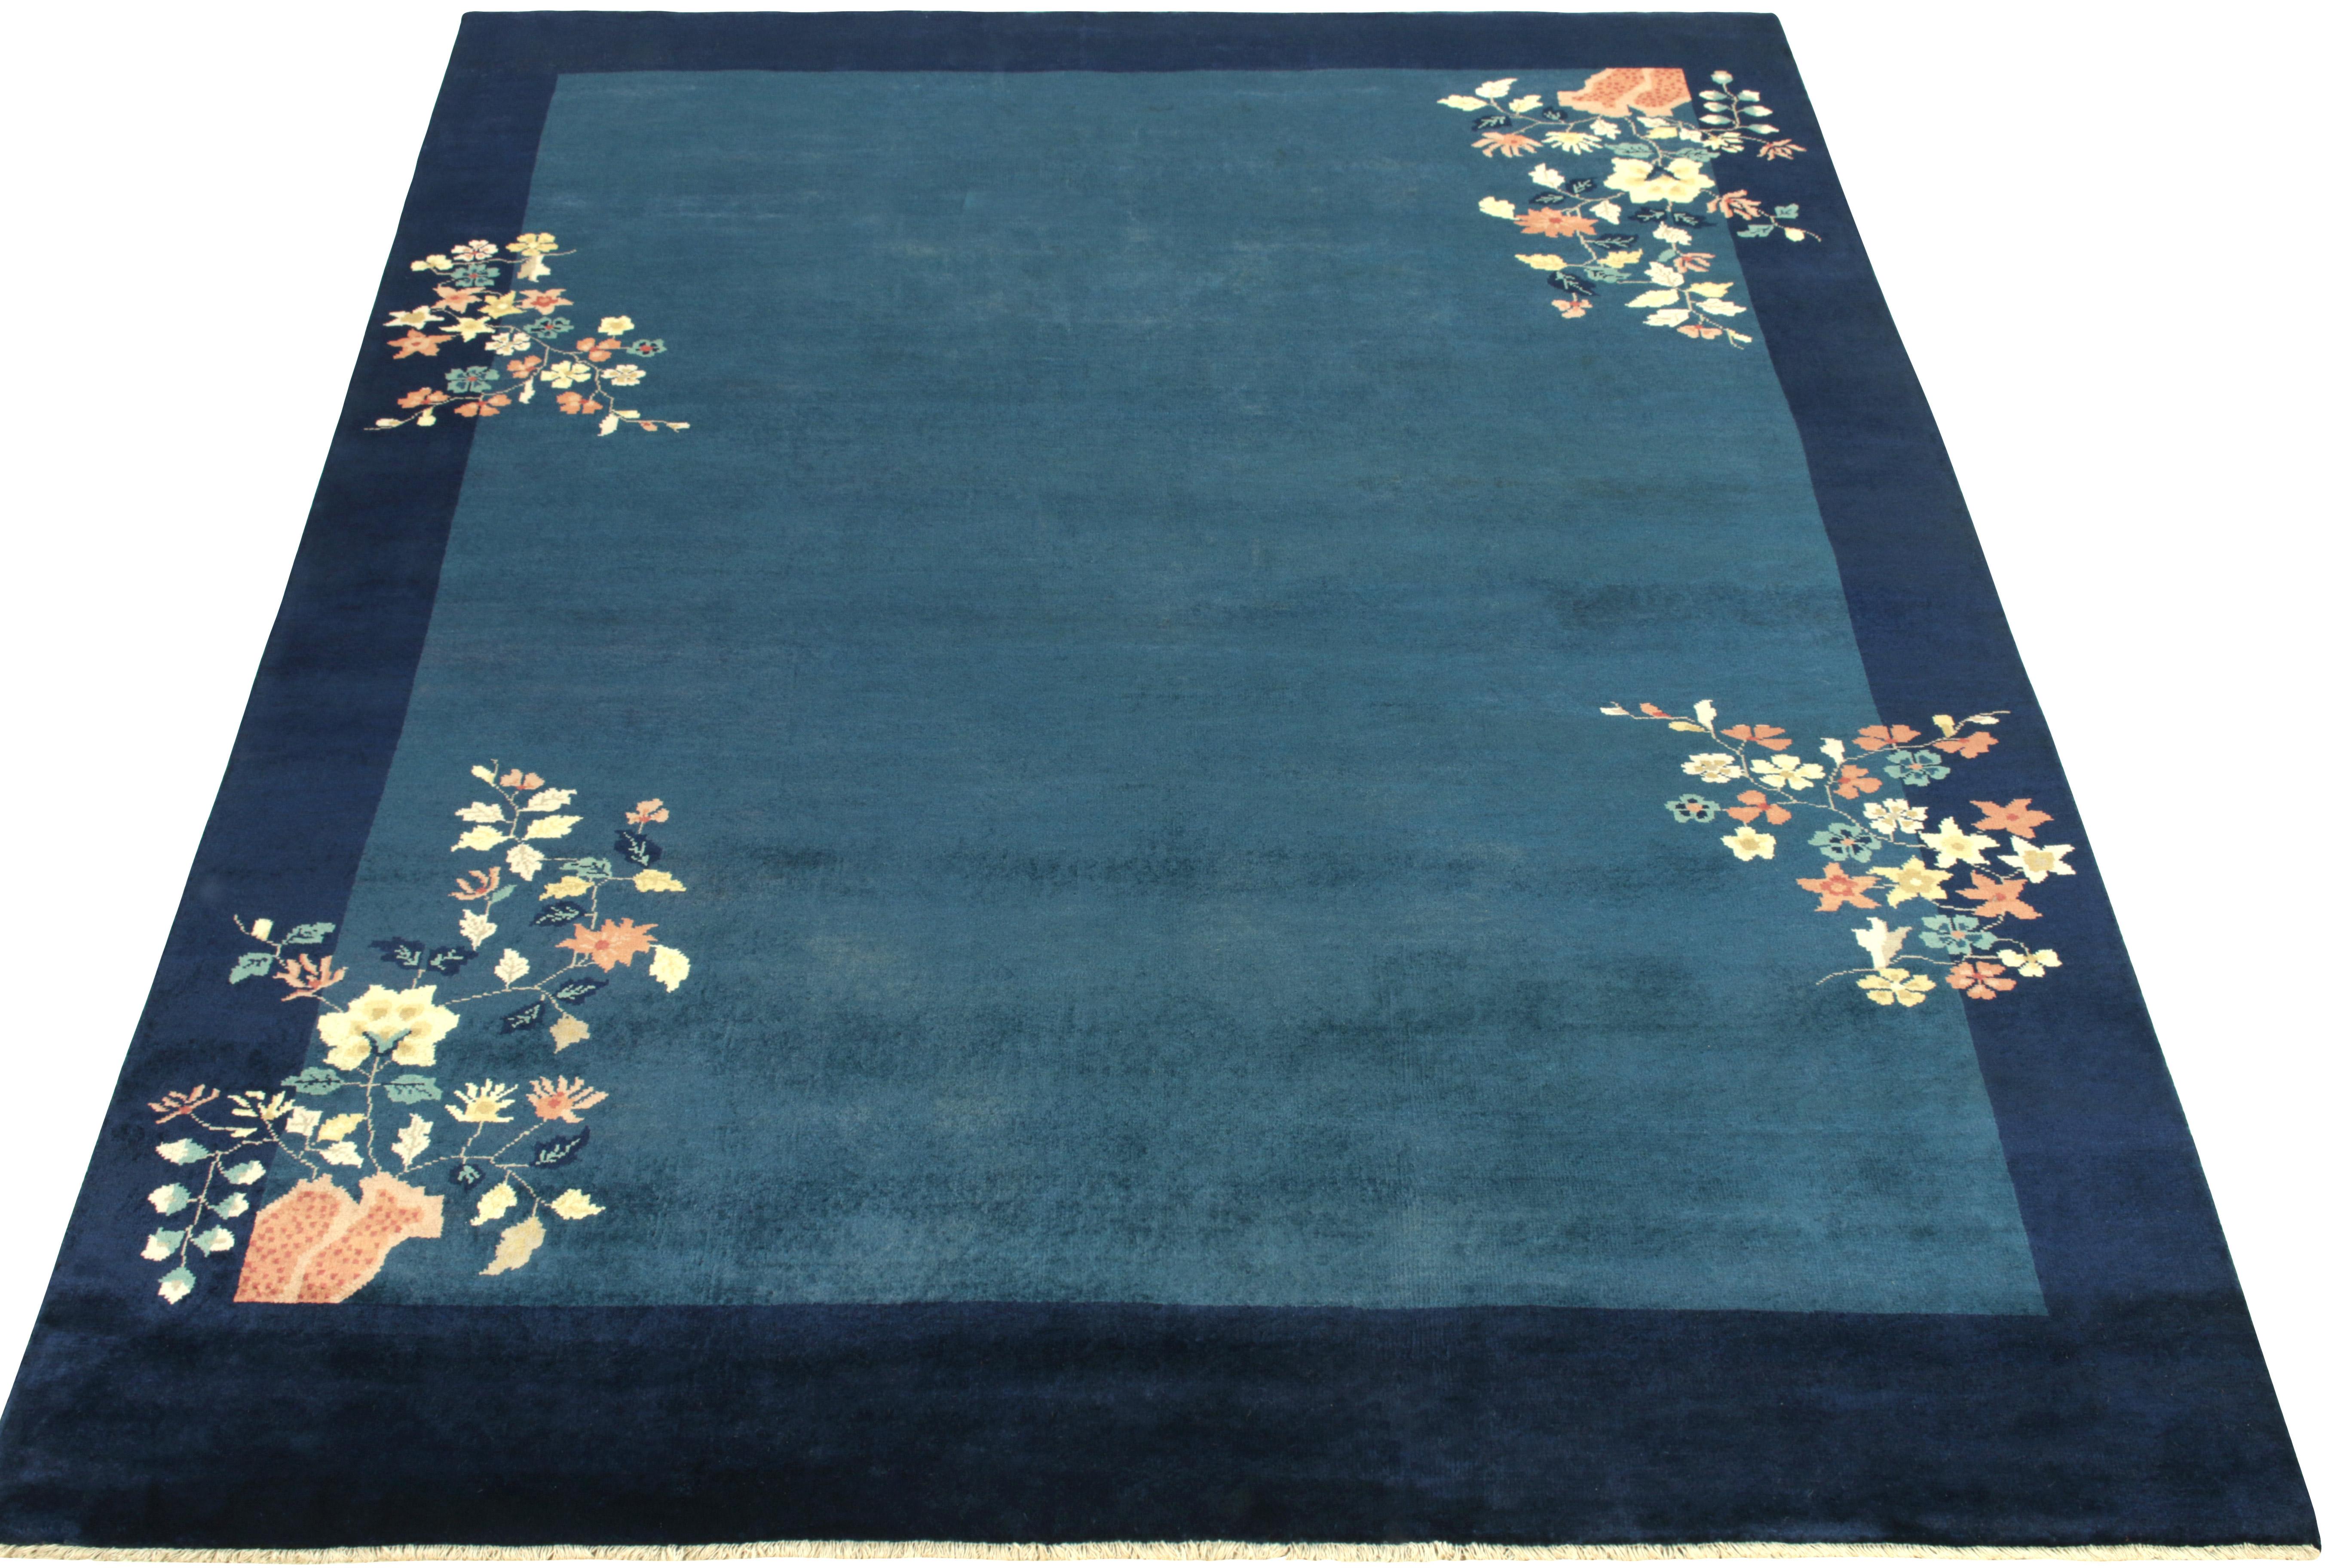 Hand-knotted in wool, a 7 x 9 vintage Chinese art deco style rug from our Antique & Vintage collection, inspired by classic sensibilities of the 1920s. The rug enjoys a healthy pile in tones of blue complementing the light dark spots on the field